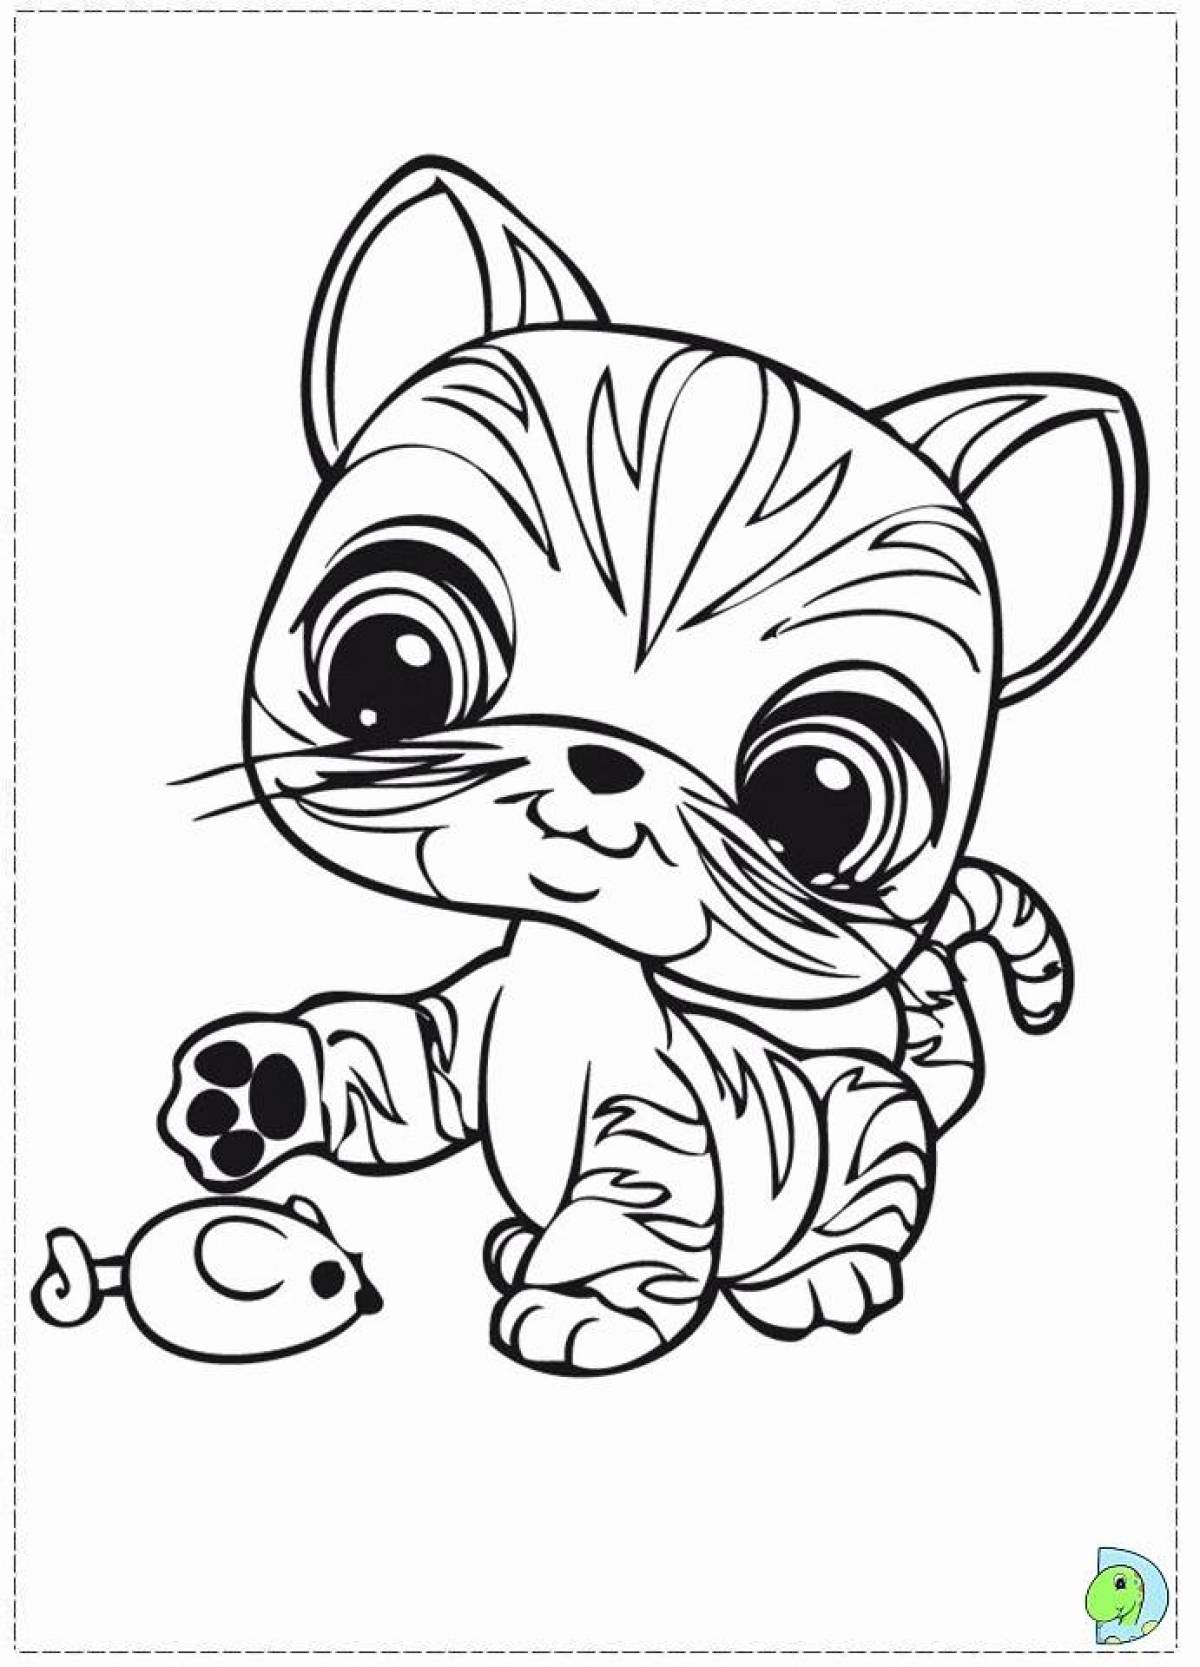 Colorful kitten coloring book